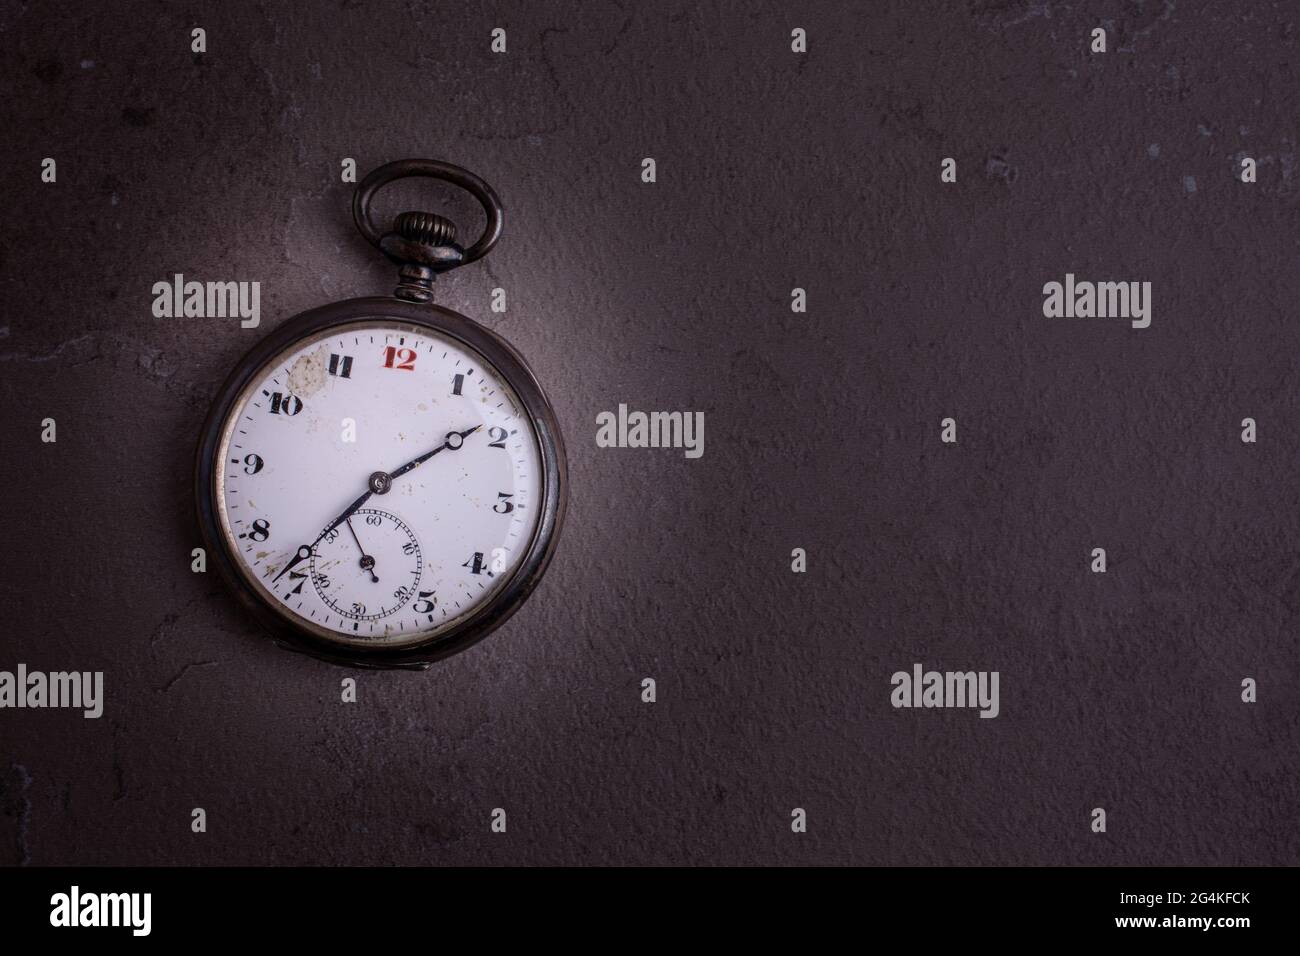 Old pocket watch on dark background with copy space Stock Photo